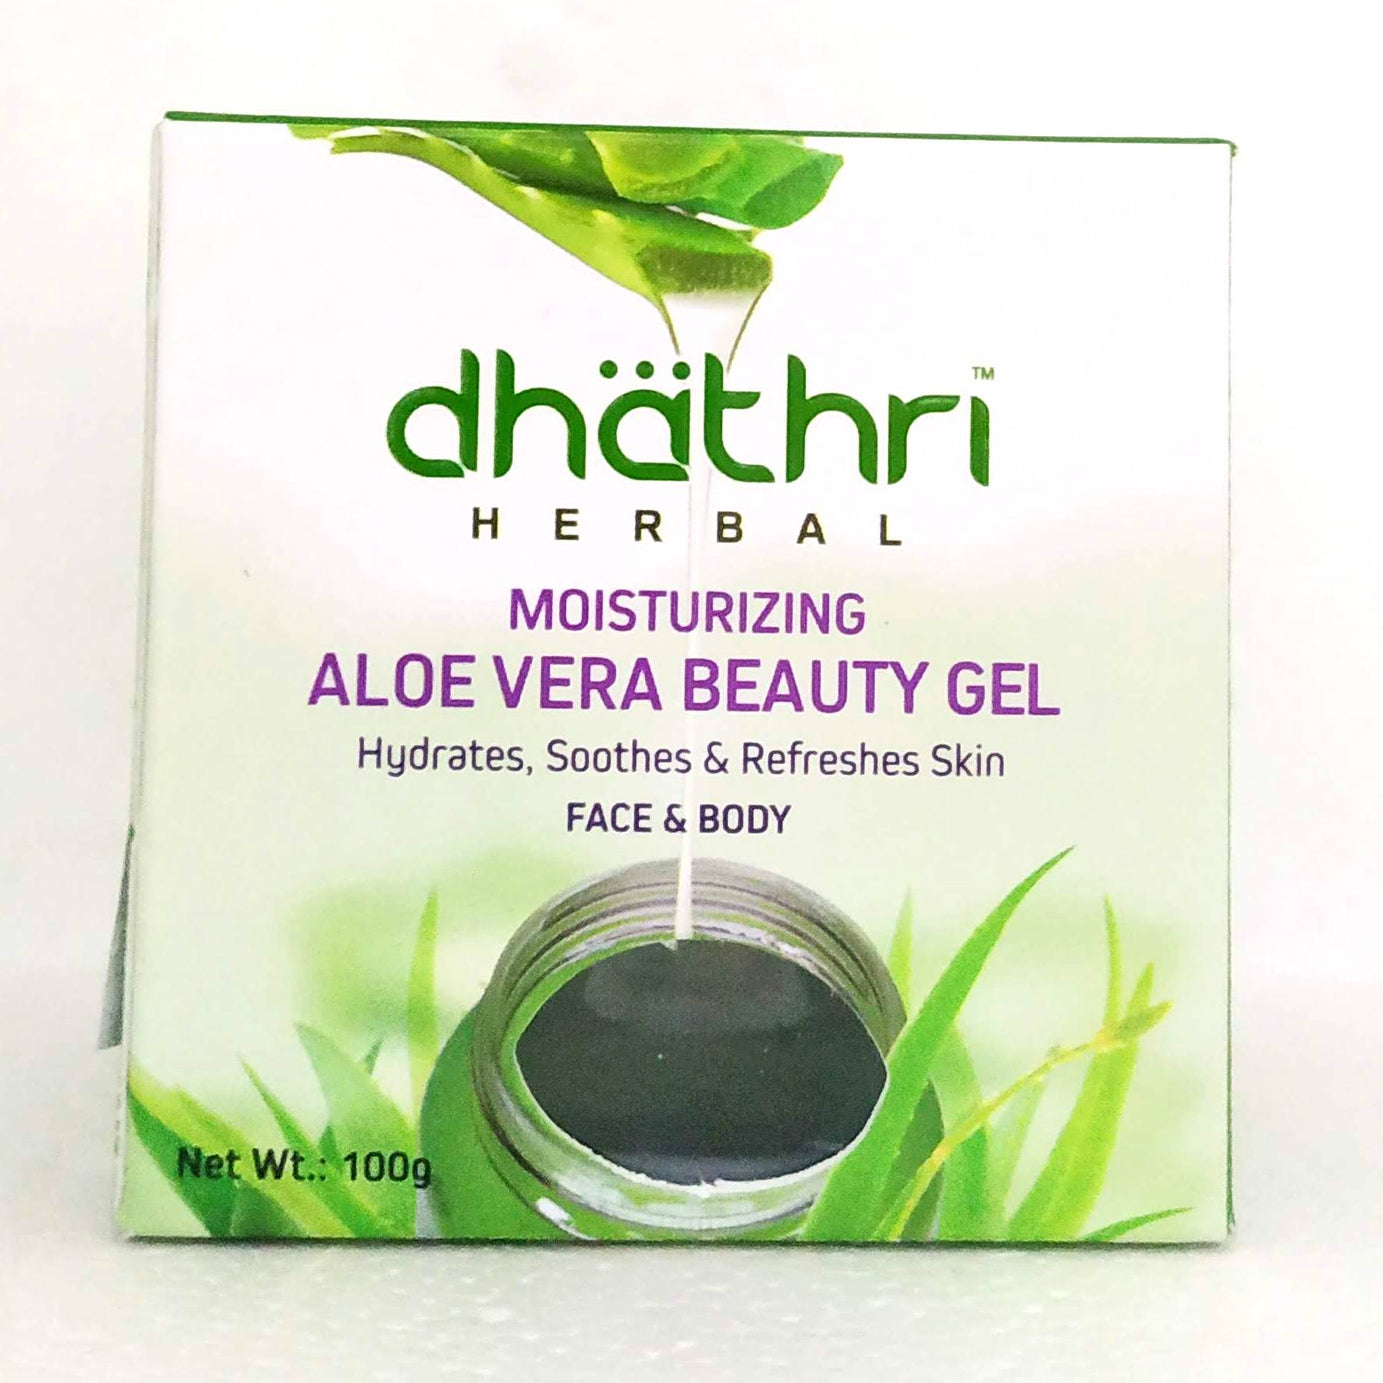 Shop Dhathri aloevera beauty gel 100gm at price 95.00 from Dhathri Online - Ayush Care